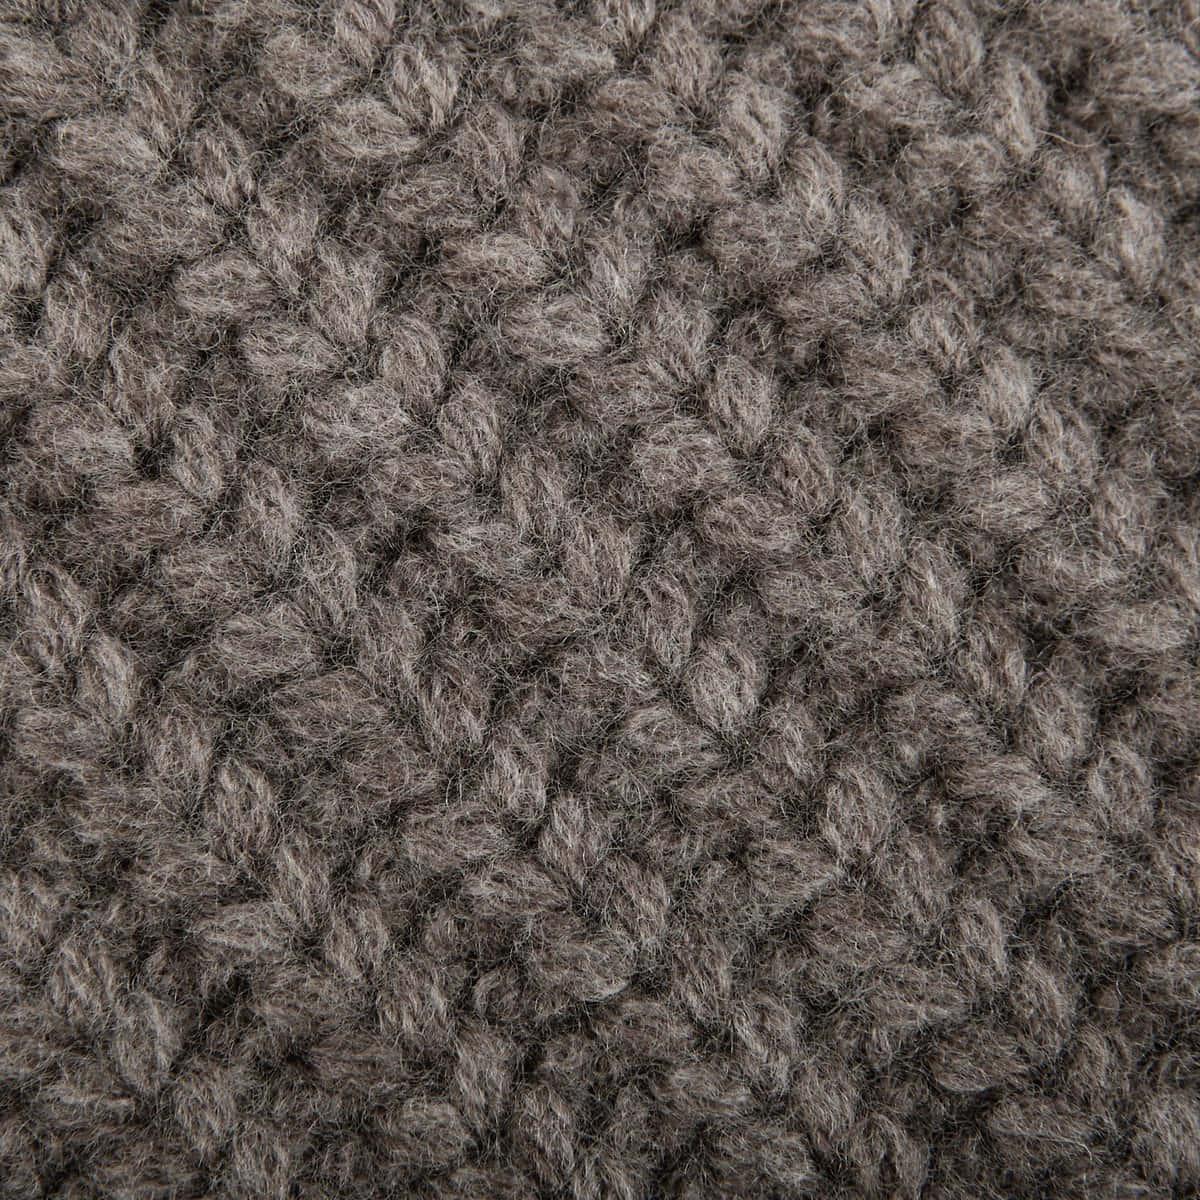 Cozy Knitted Wool Texture Wallpaper